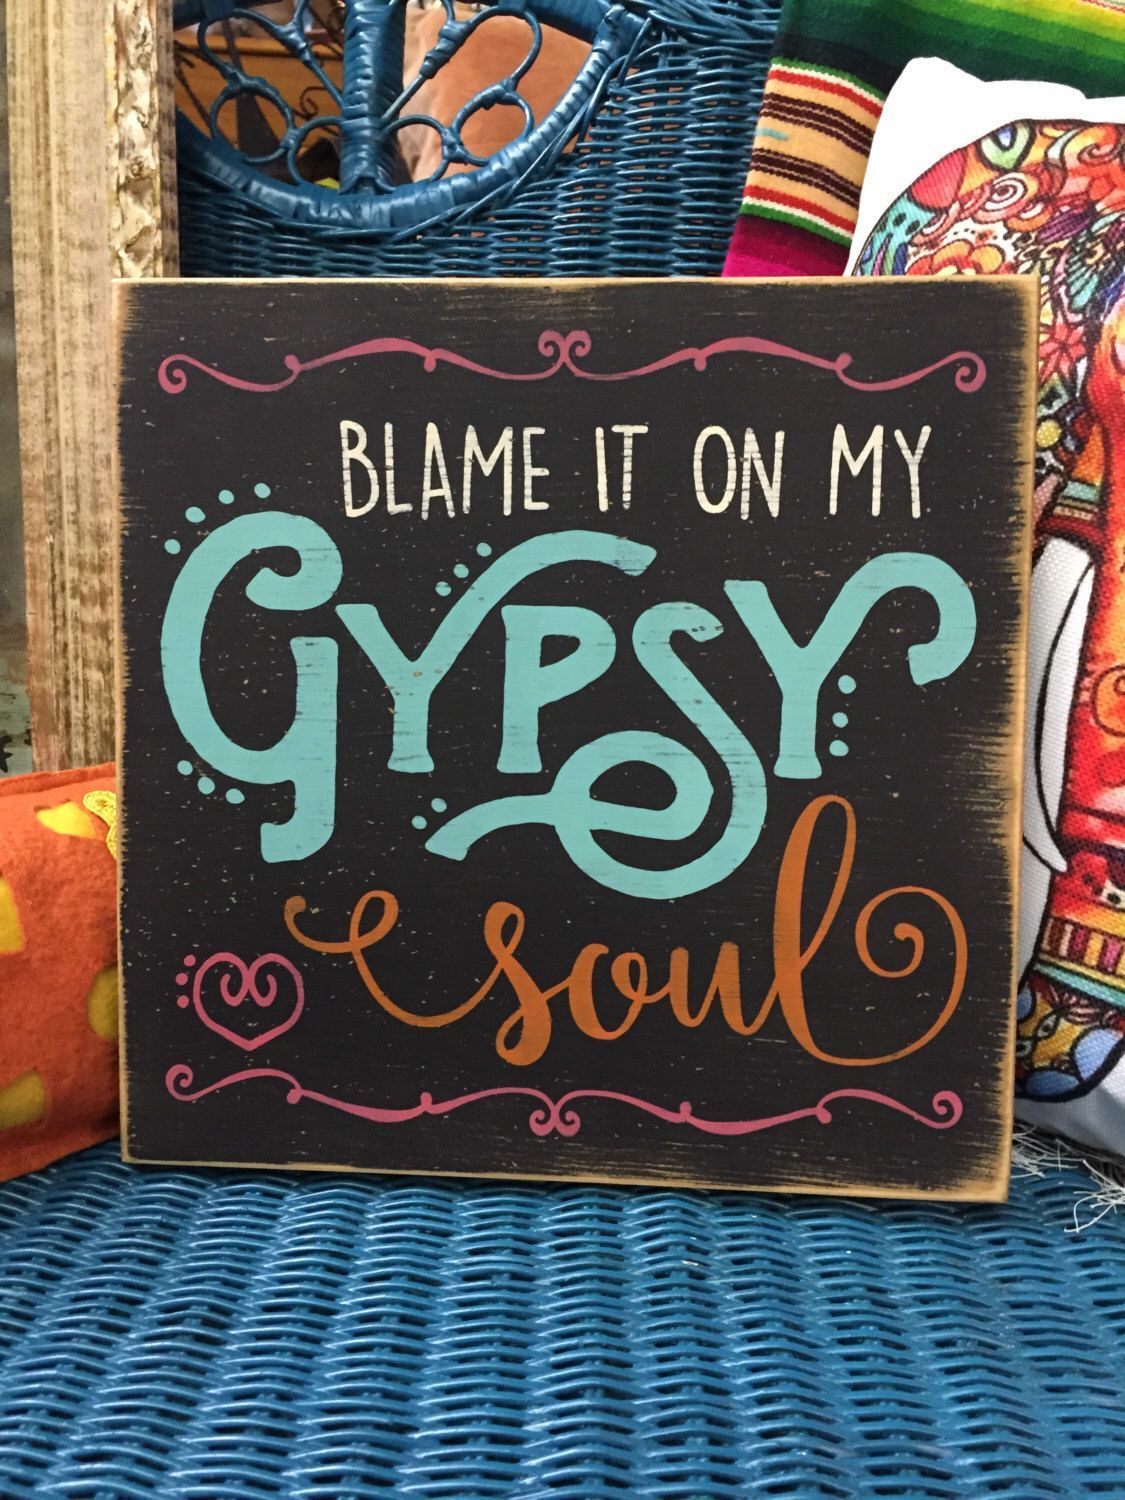 Blame it on my Gypsy Soul, BOHO decor, hand painted distressed rustic wood sign, junk gypsy decor, bohemian decor, gypsy hippie room decor -   23 bohemian decor paint
 ideas